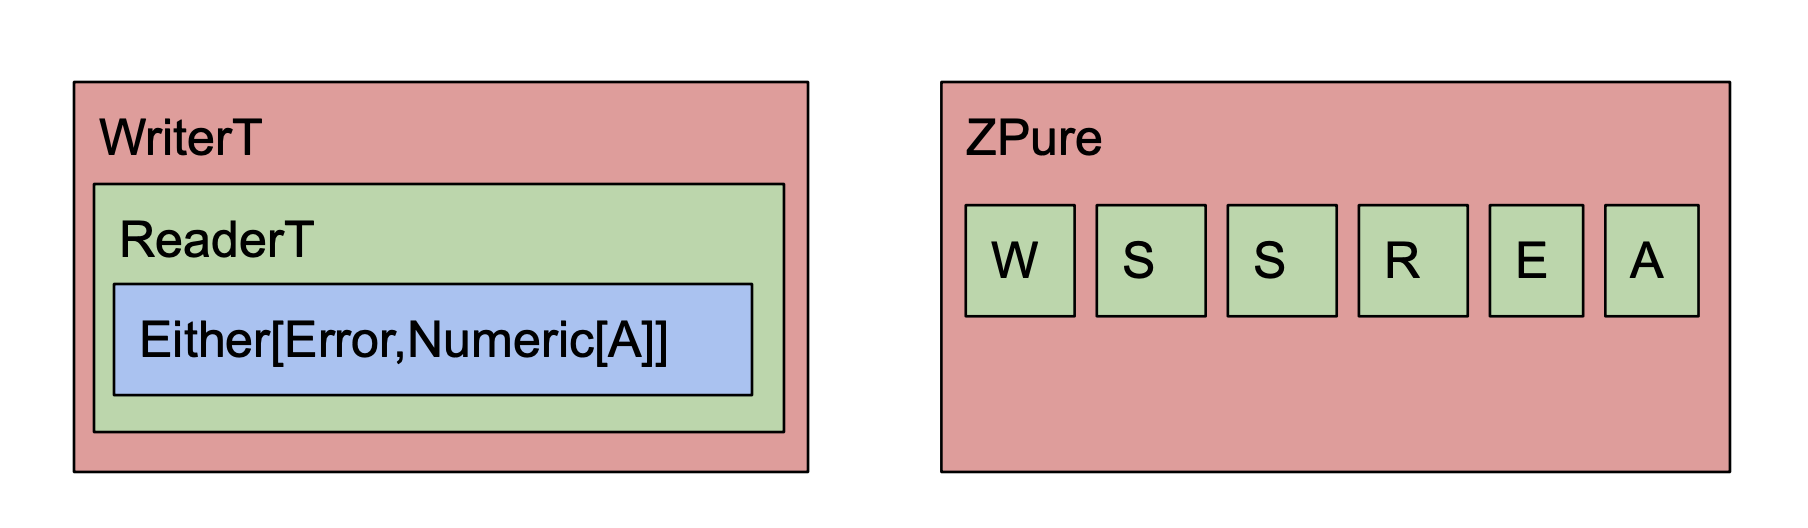 Diagram of monad transformers with the ZPure type